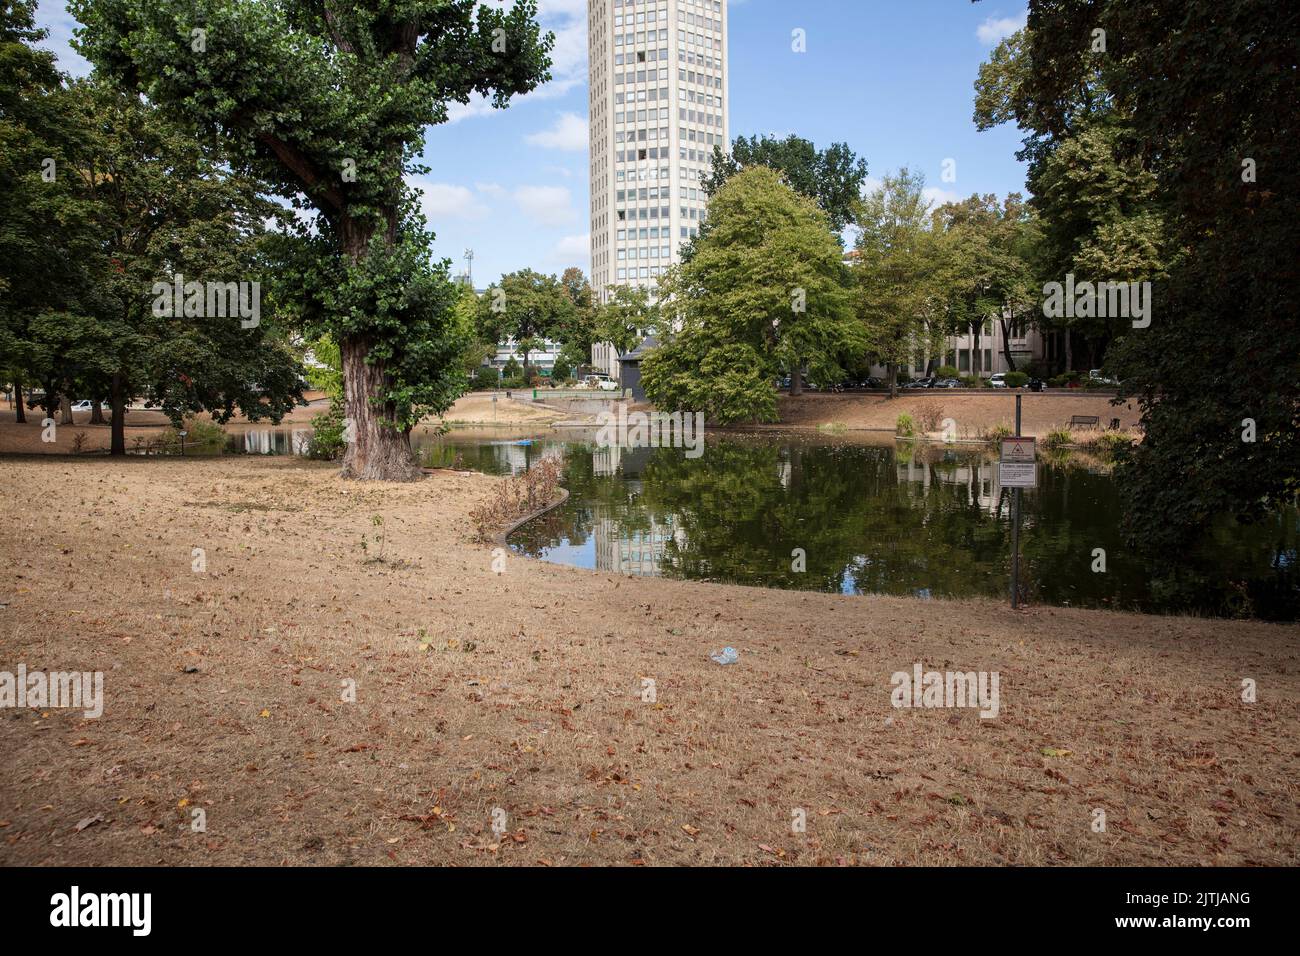 dried up lawn in the park at the Theodor-Heuss-Ring near the square Ebertplatz, drought, the Ringturm high-rise building on Ebertplatz, Cologne, Germa Stock Photo